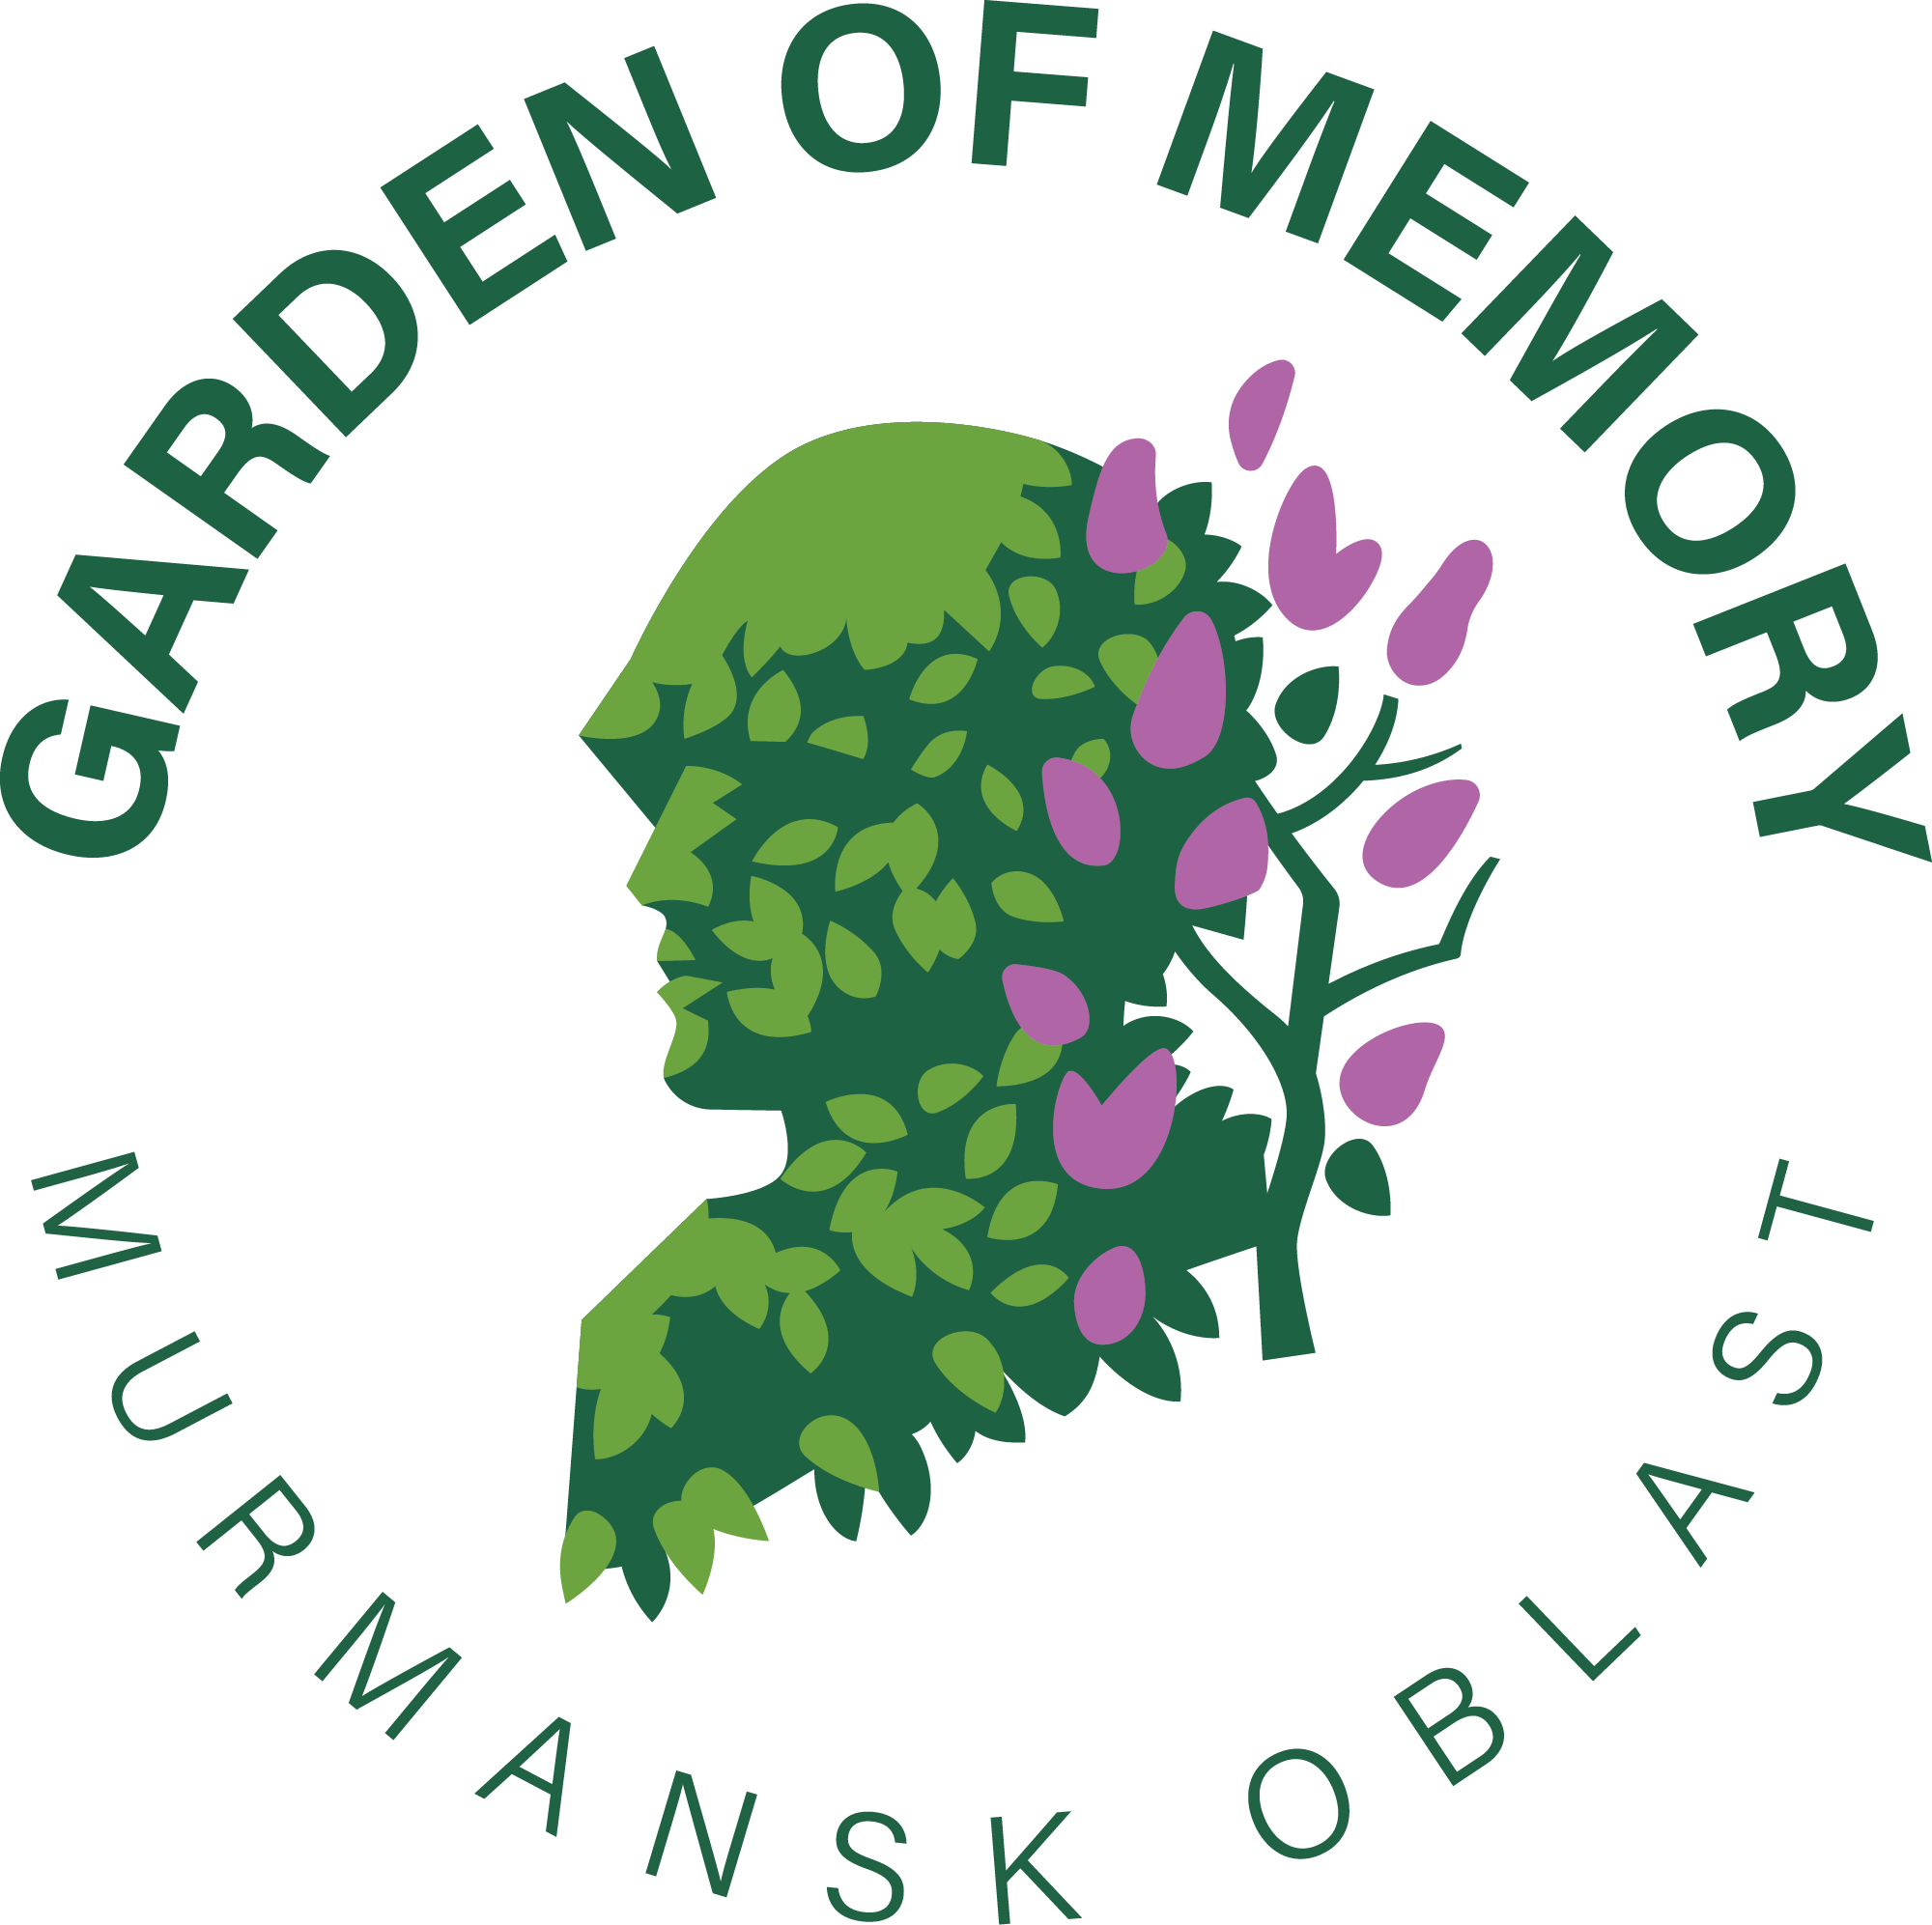 Garden of Memory is an international campaign aimed to honor those who 
fell while serving this country during WWII. PORA, Clean Arctic and Volunteers of Victory joined their efforts to restore war memorials and mass graves alongside Federal Route E105 (P21), remove illegal graffiti from the rocks and plant trees.